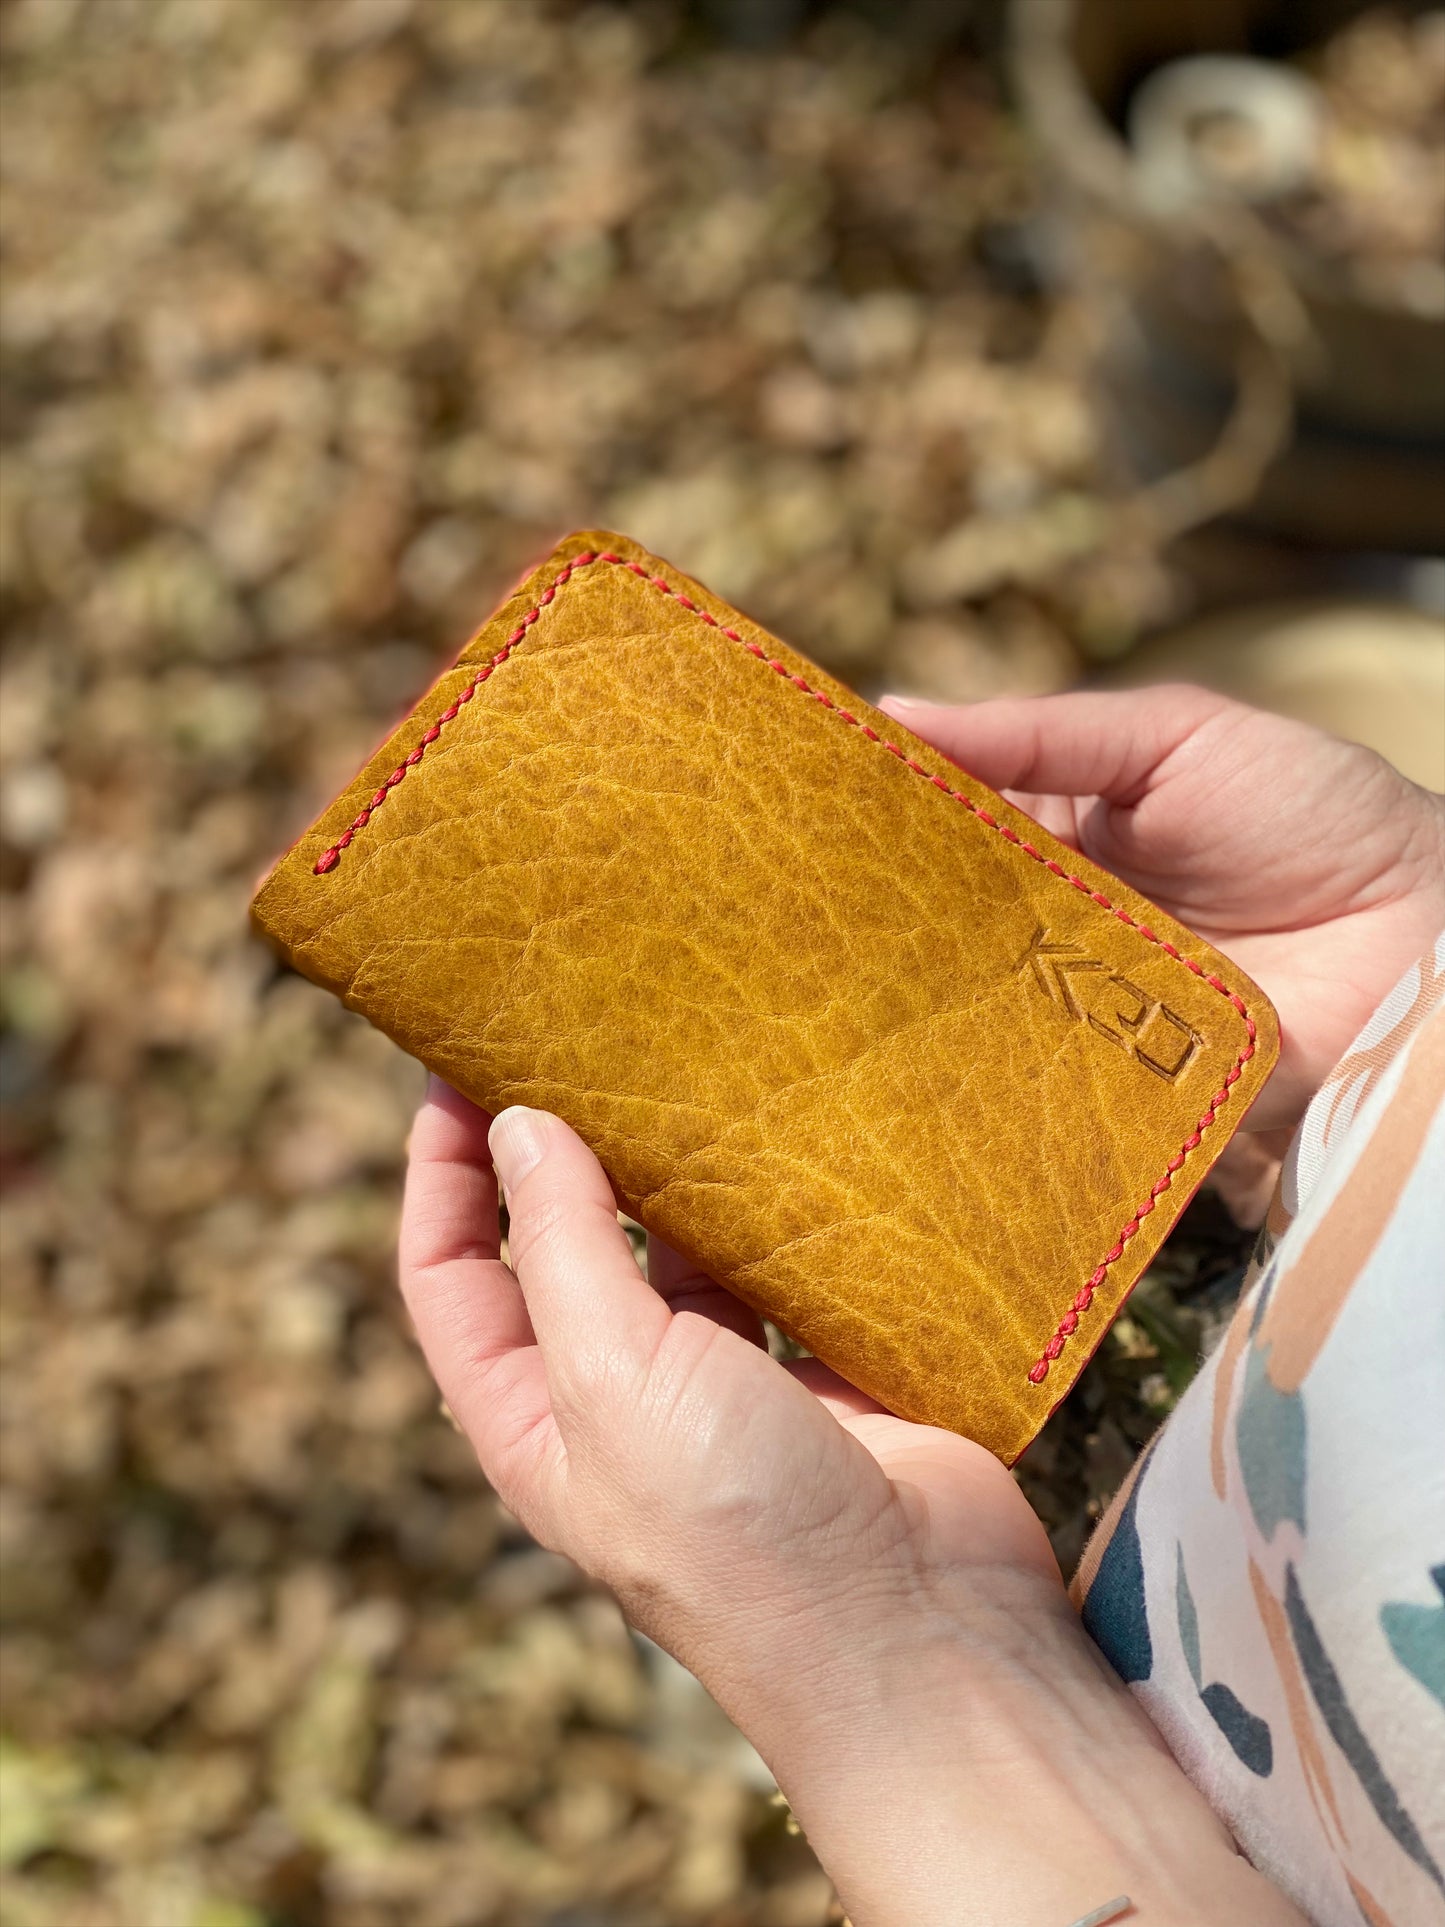 Kaiju Cut and Sew Field Notes/Passport Cover with Credit Card Pocket | Yellow Bison Leather | Handmade in Austin, Texas